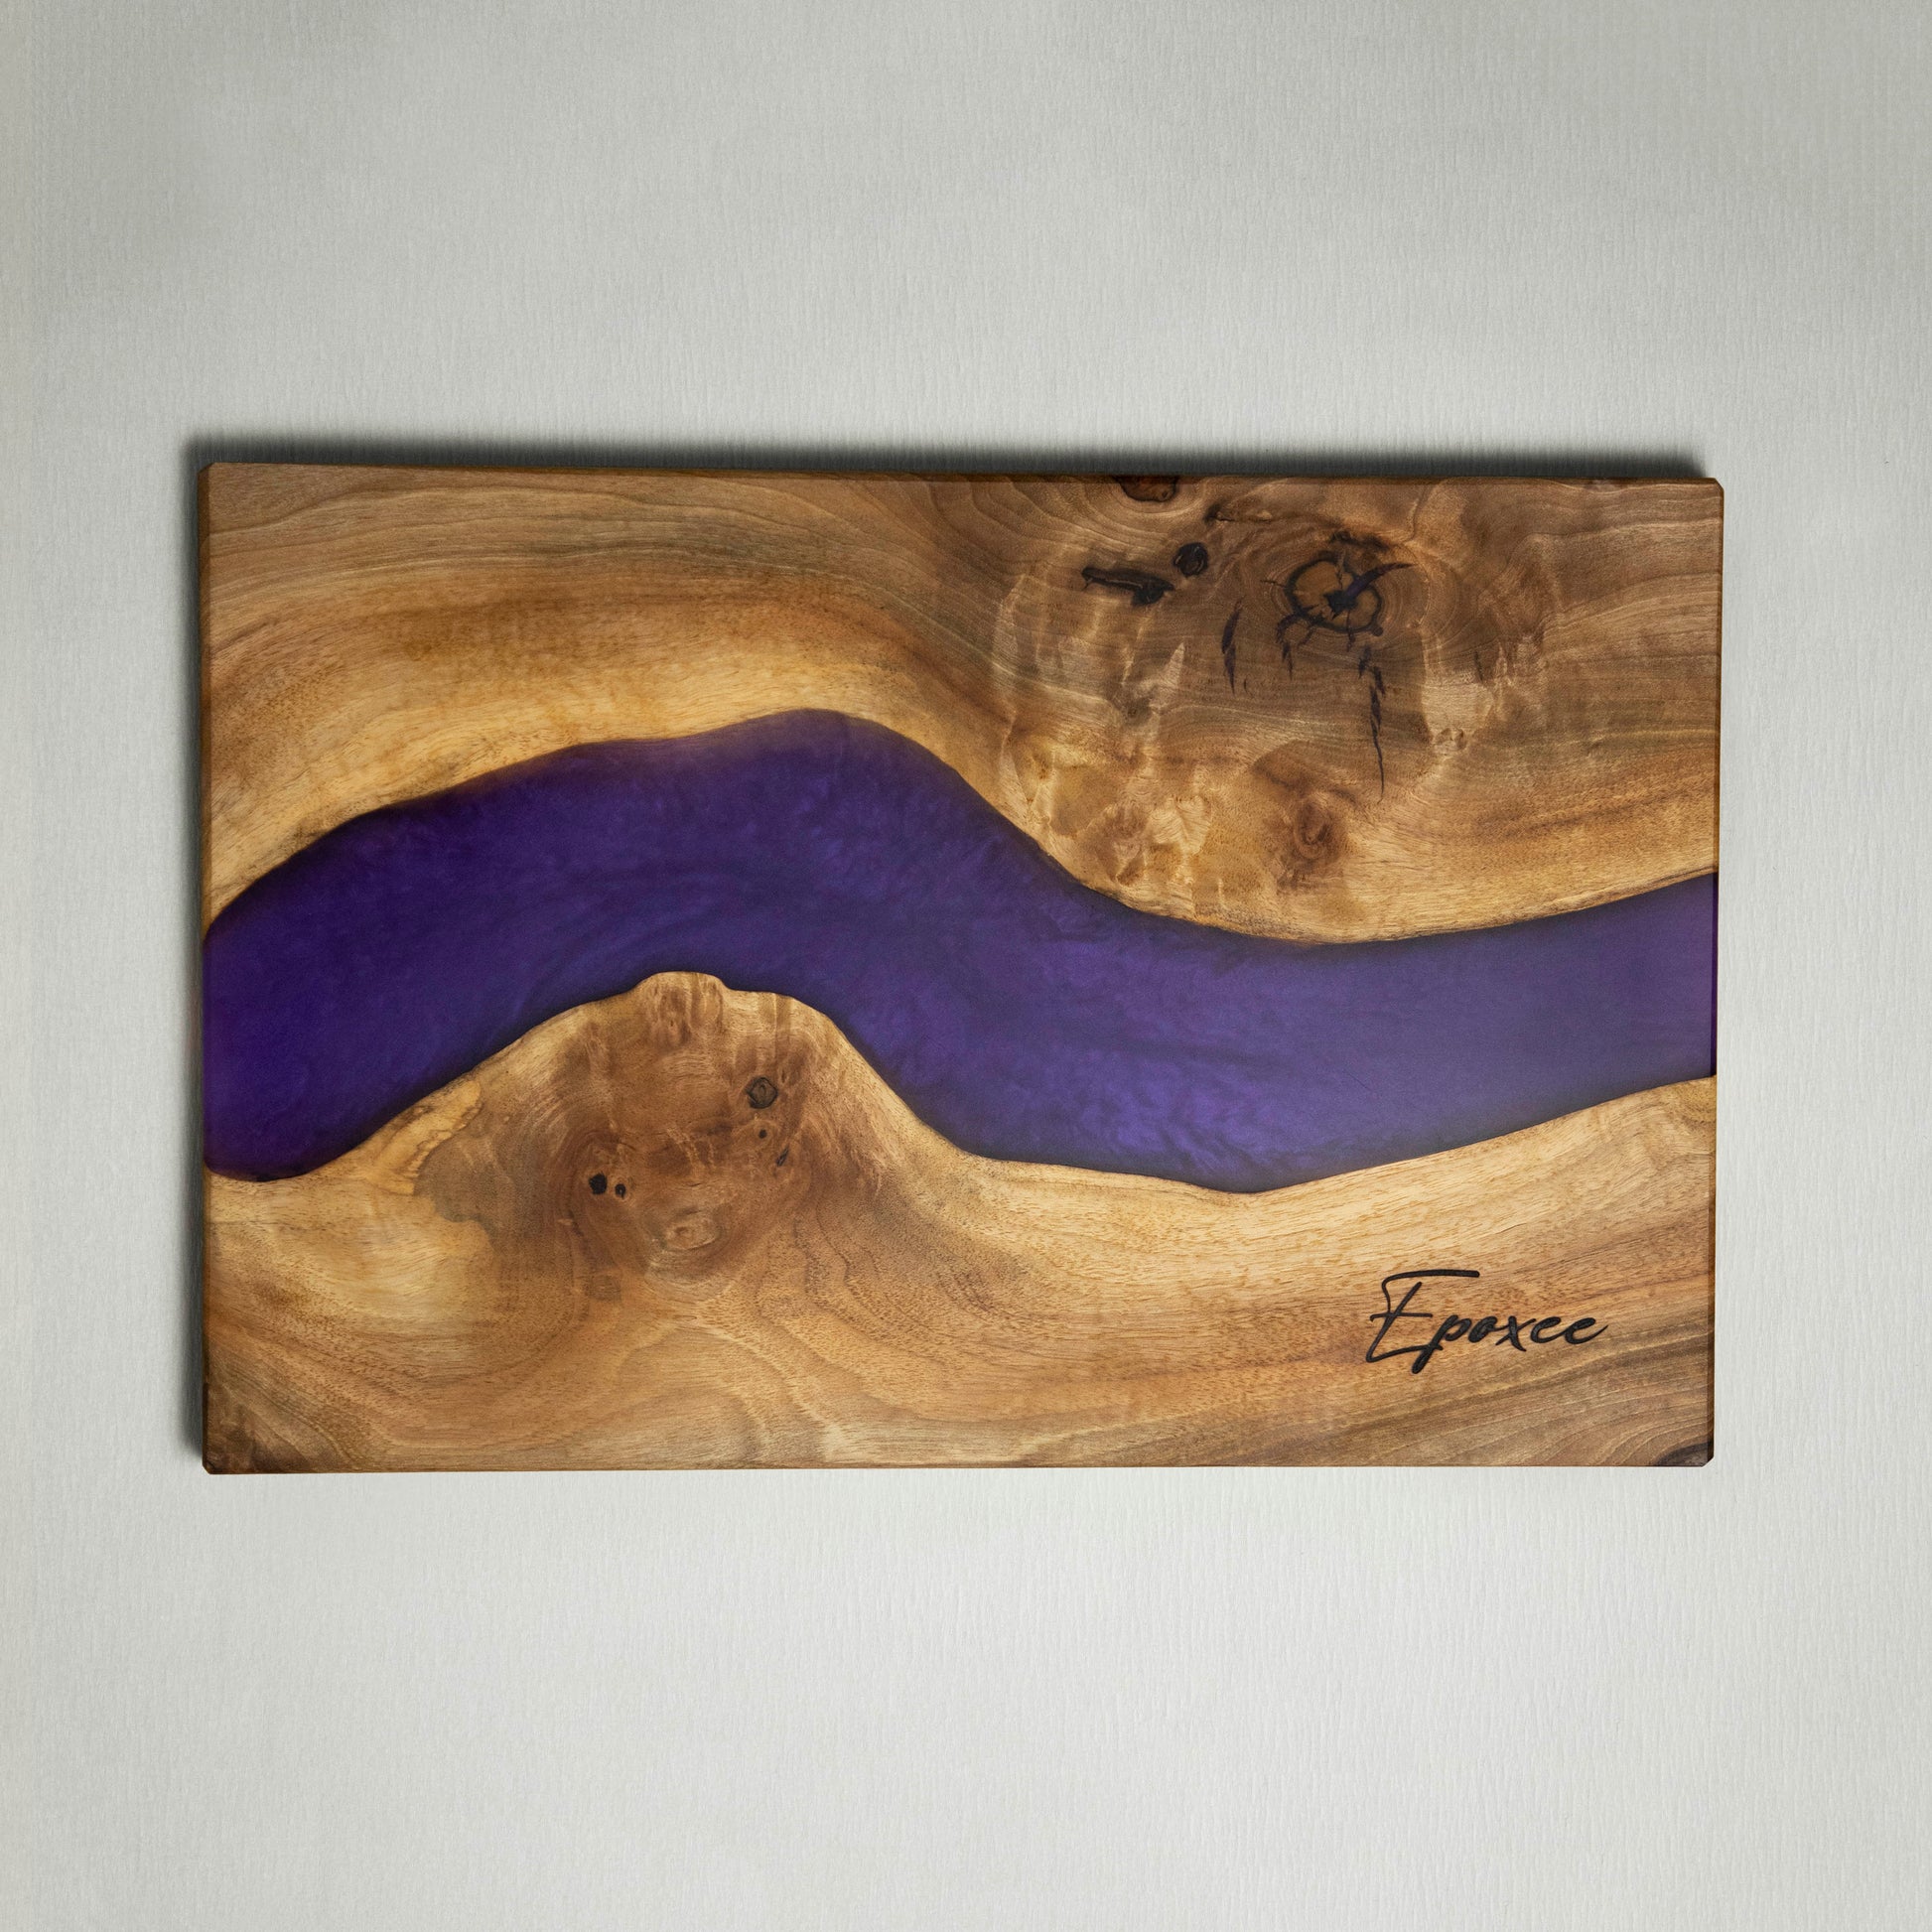 Serving board made from wood and epoxy resin in the color purple